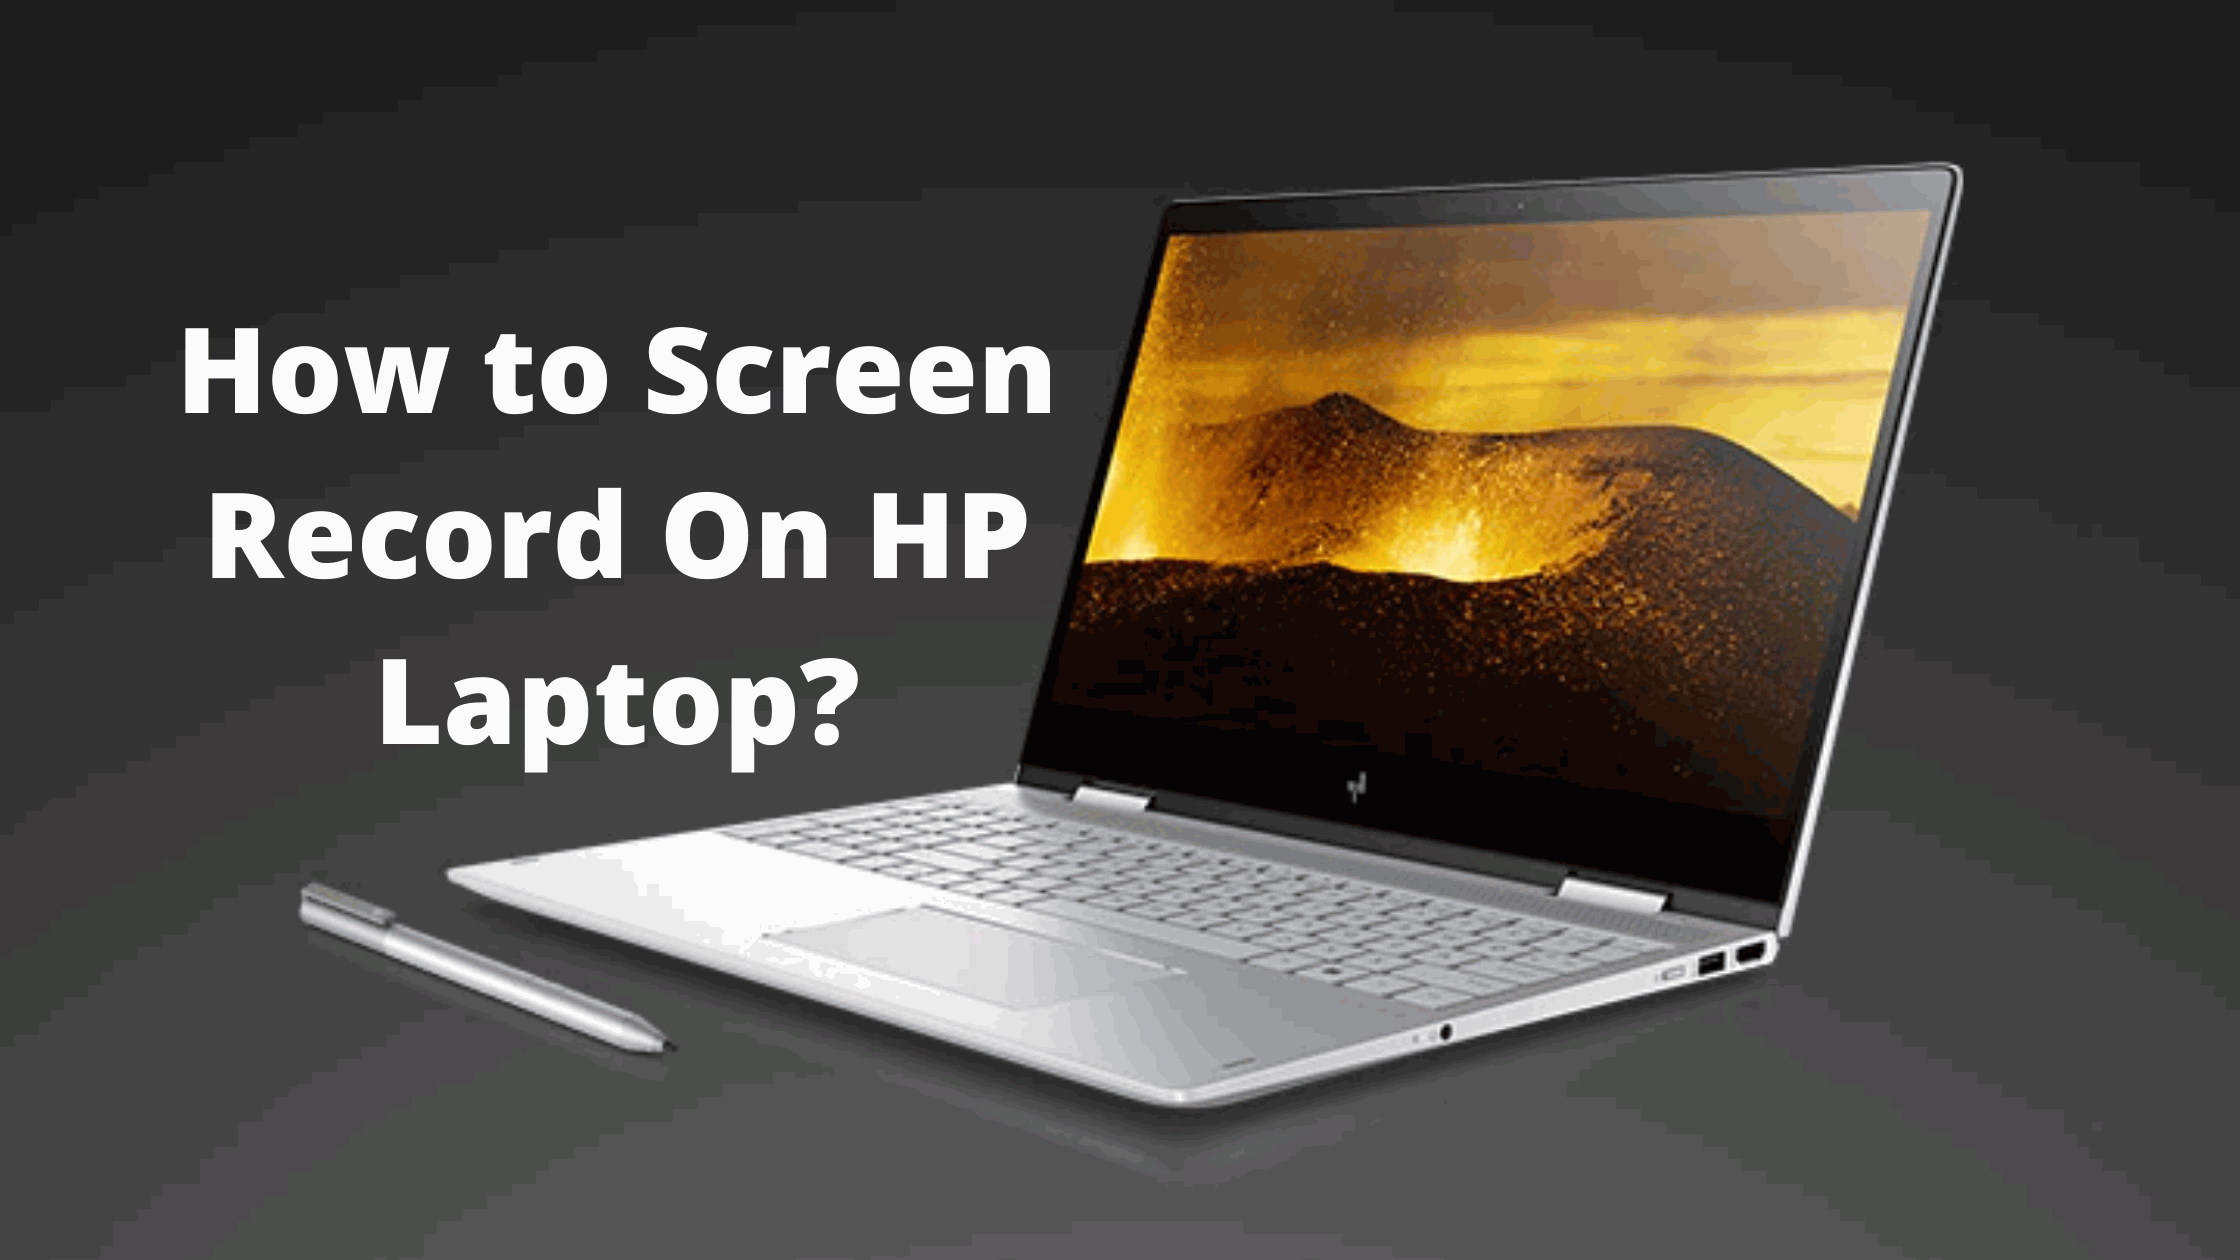 How to Screen Record On HP Laptop